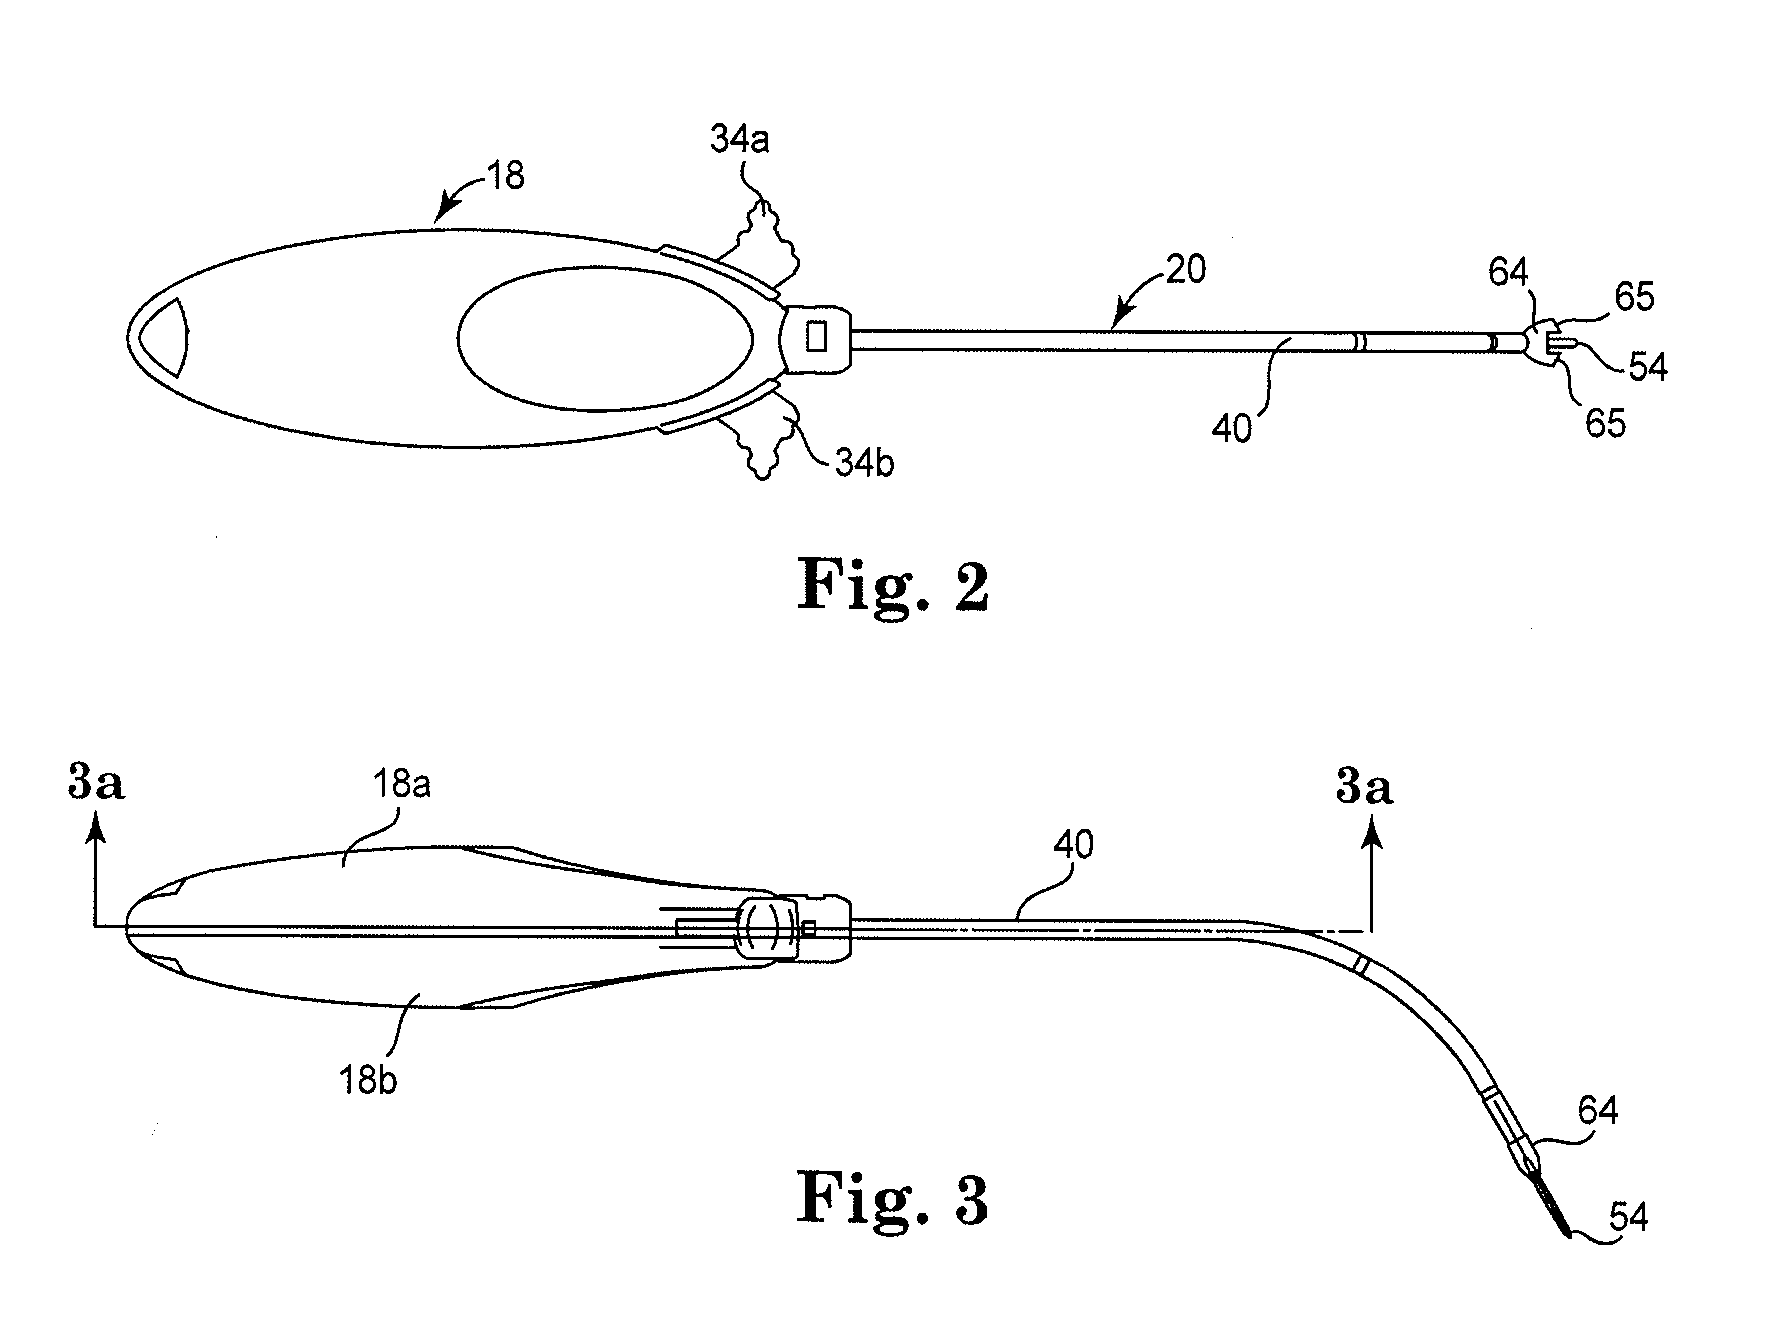 Surgical Needle and Anchor System with Retractable Features